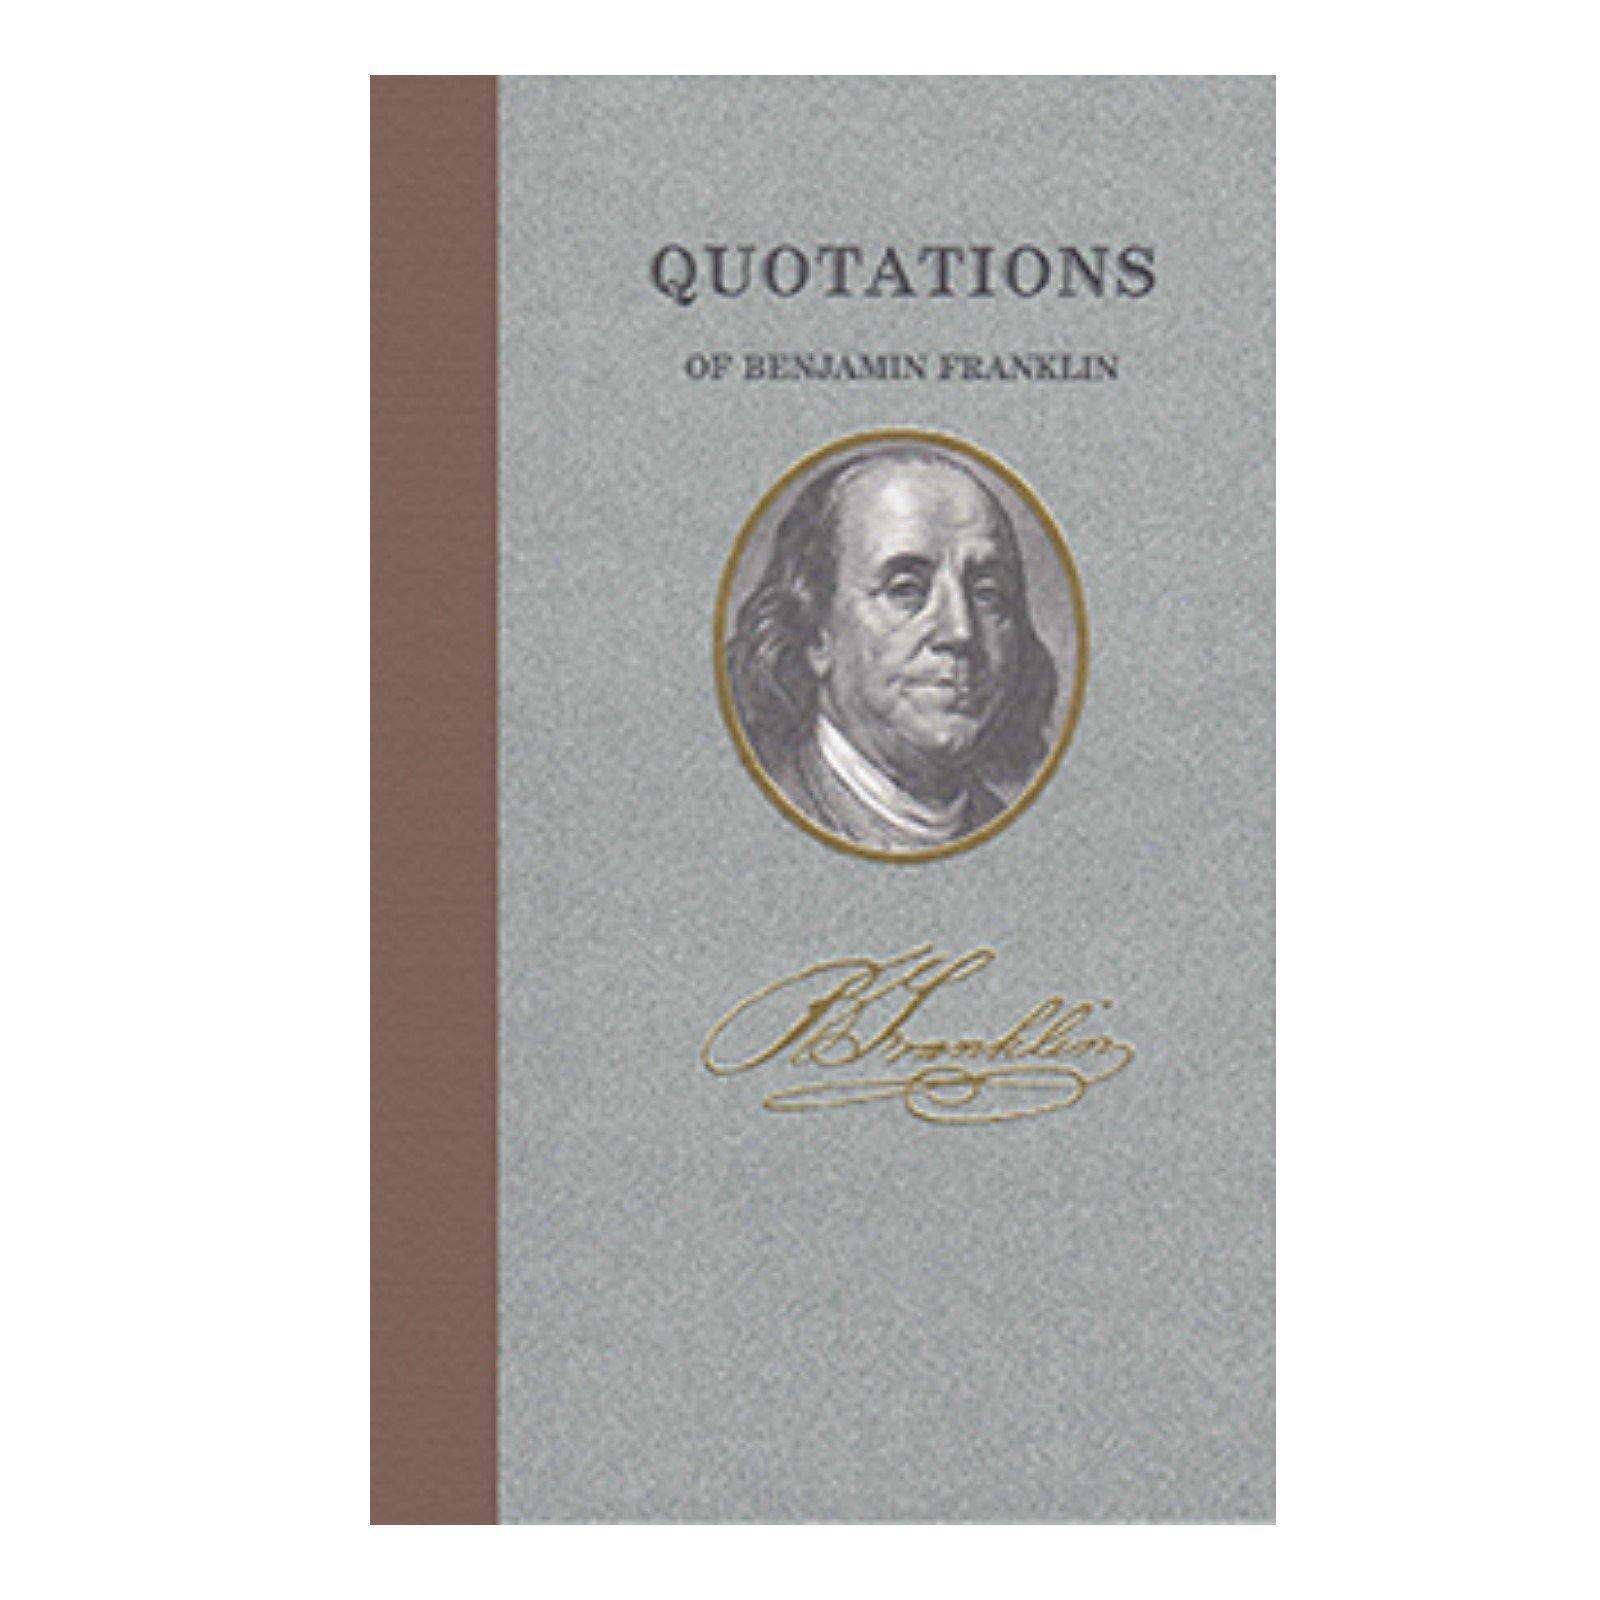 Quotations of Benjamin Franklin - Library of Congress Shop